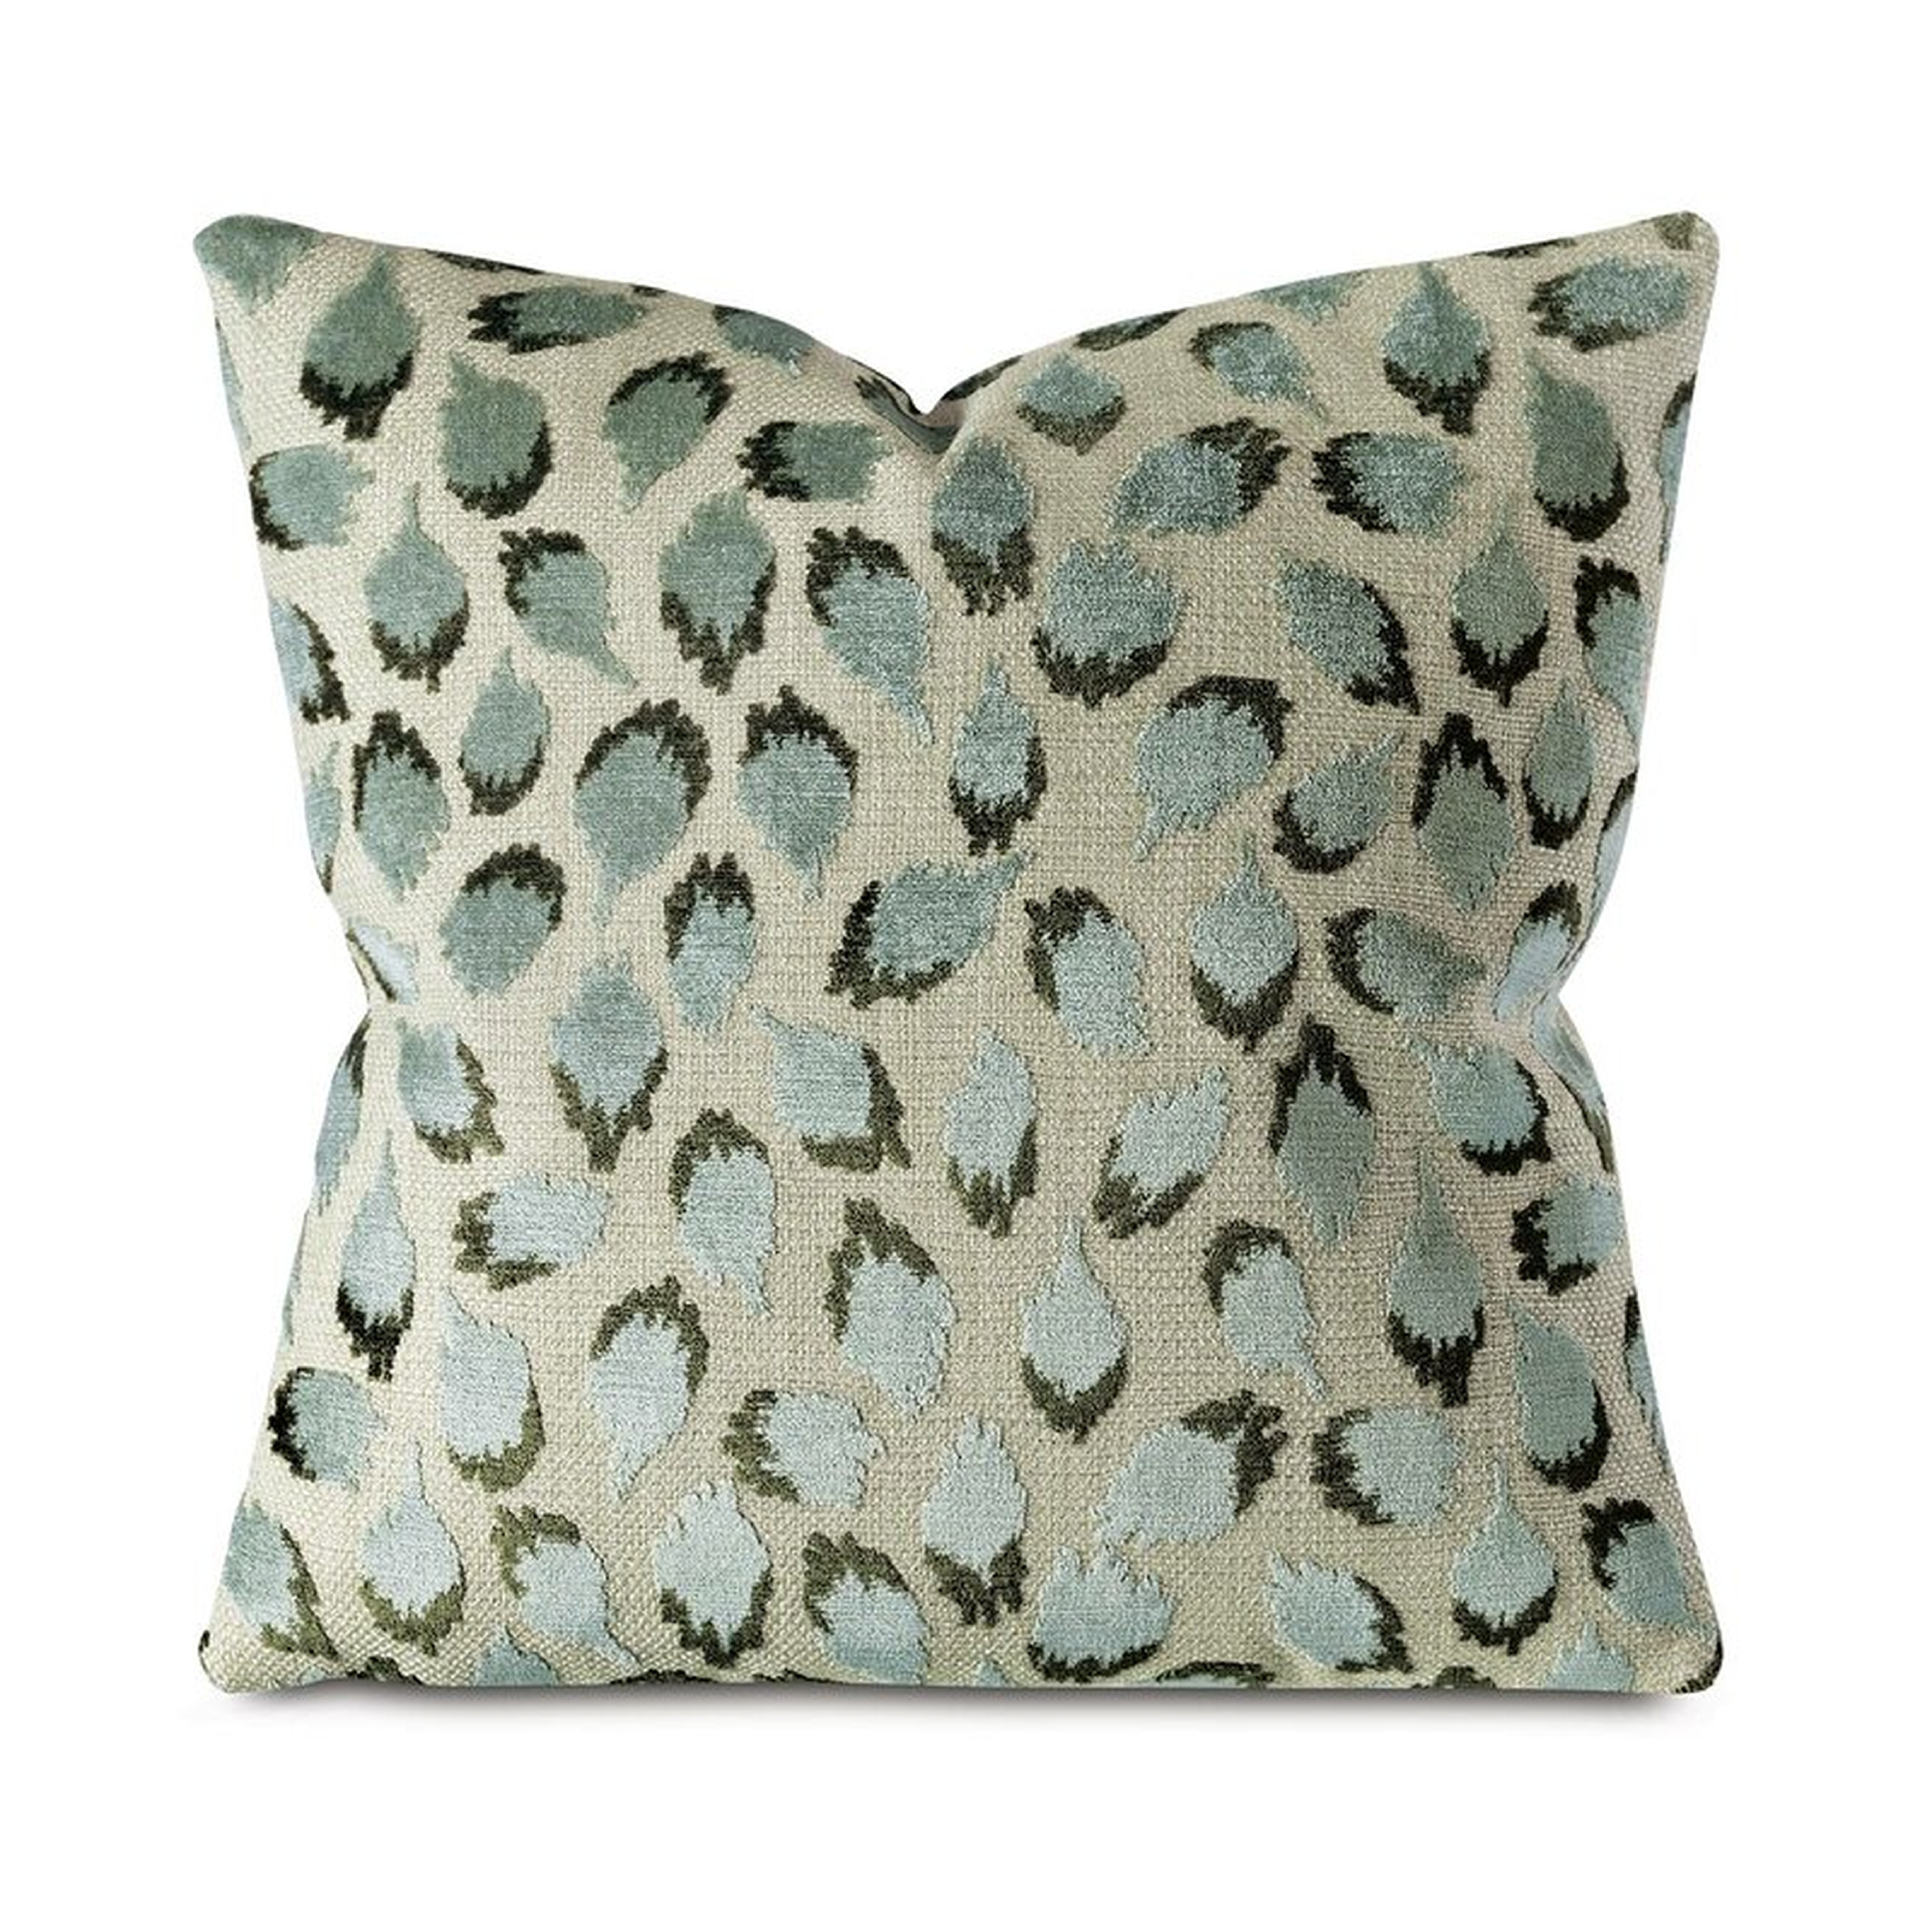 Eastern Accents Square Pillow Cover & Insert - Perigold